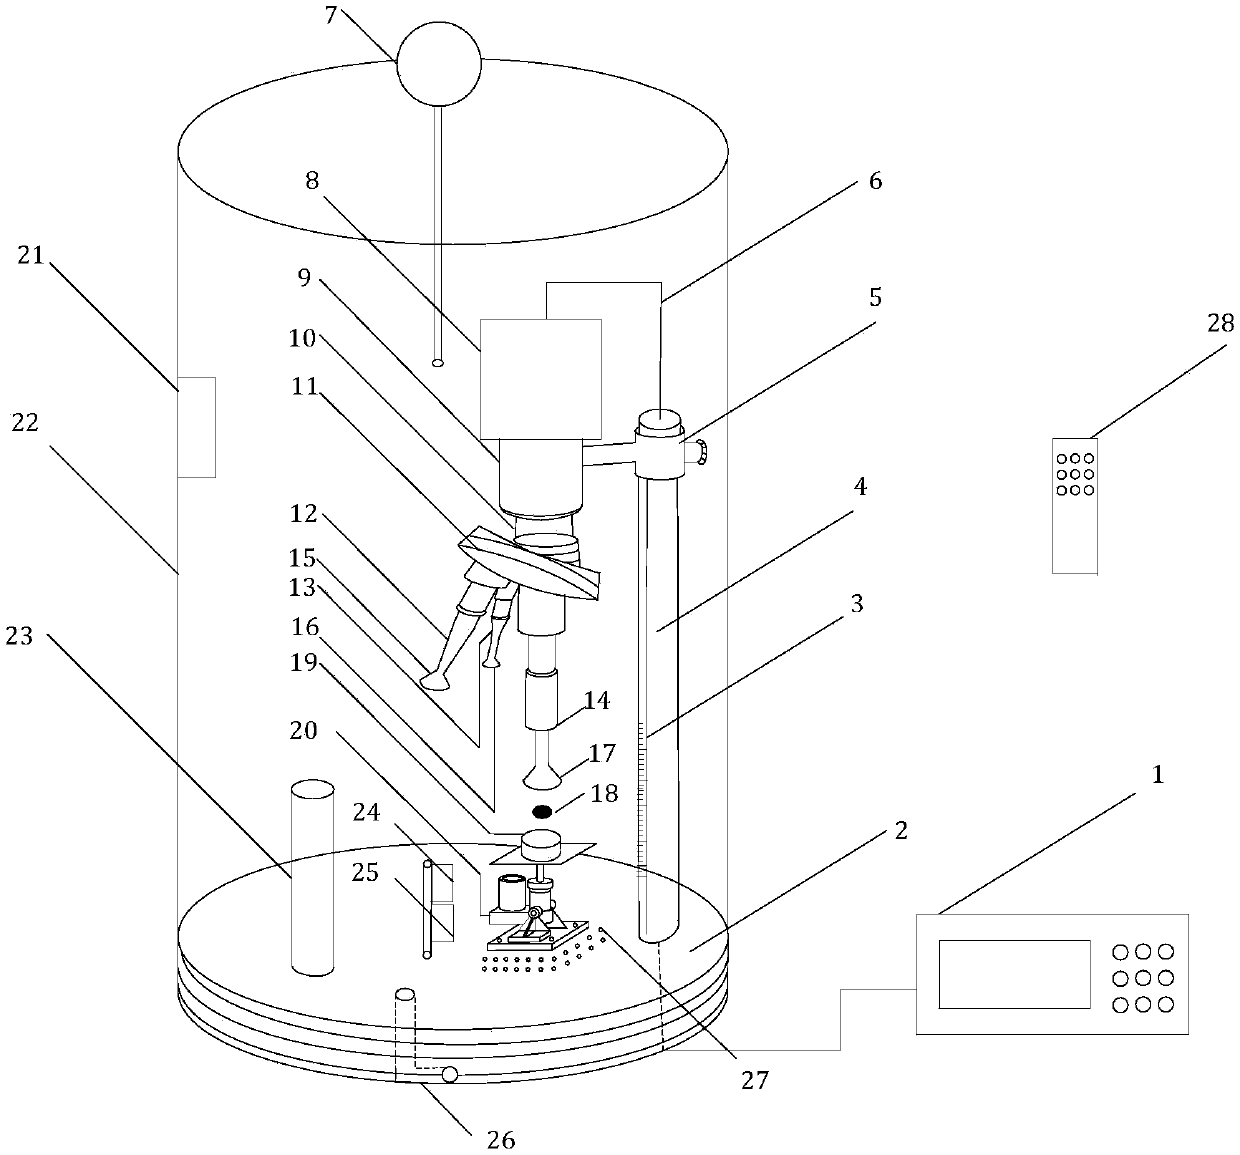 Multiple physical environment controllable acoustic levitation experiment apparatus